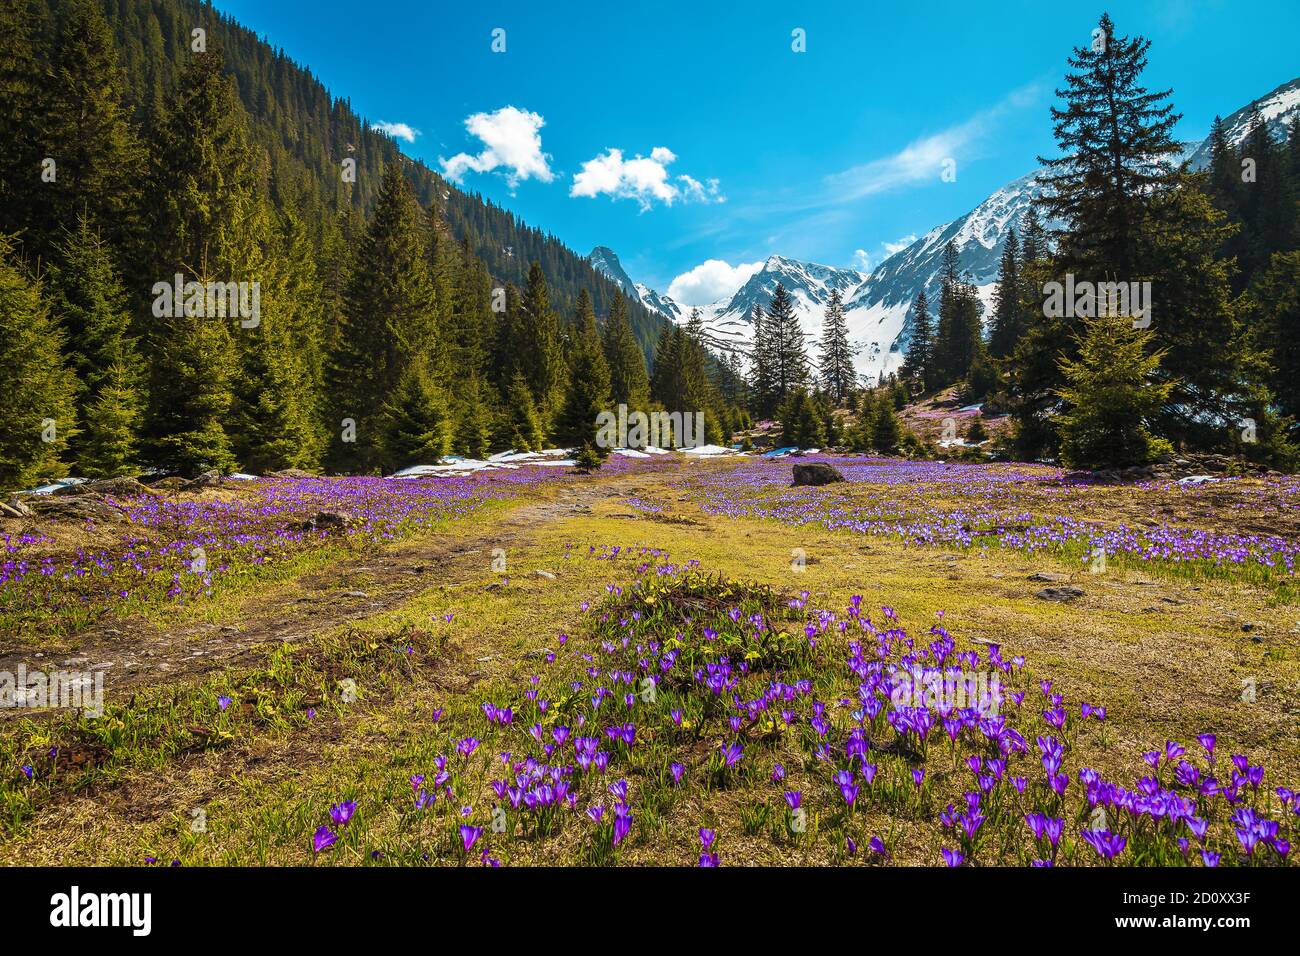 Stunning alpine spring scenery, wonderful forest glade with fresh colorful purple crocus flowers and high snowy mountains in background, Fagaras mount Stock Photo